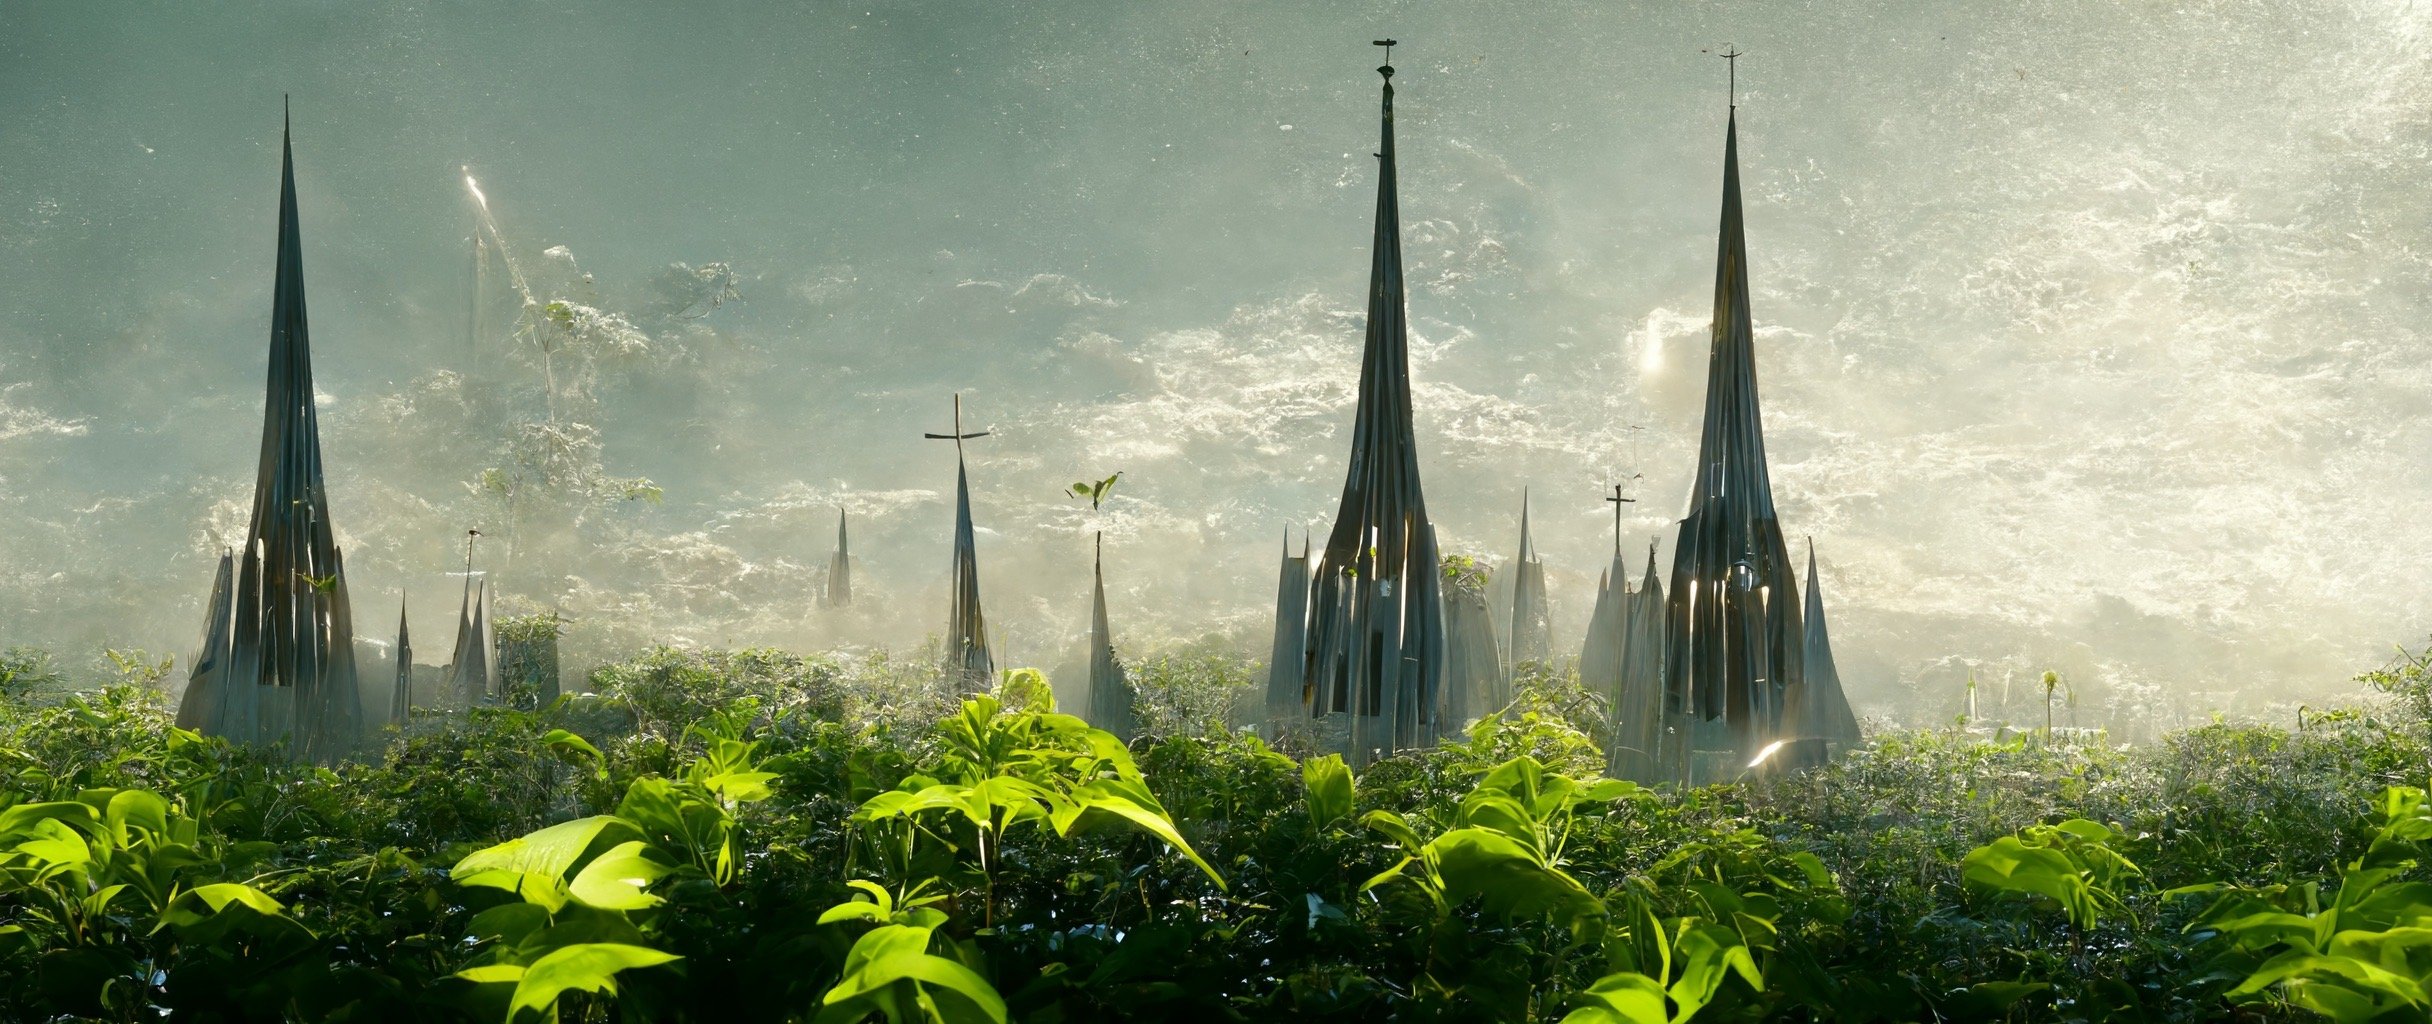 b912ddbf-d331-44b5-9162-509d22519332_S3RAPH_httpss.mj.rundz0cKZ_epic_futuristic_cathedral._Filled_with_lush_plant_life._cinematic_composition_8k.JPG